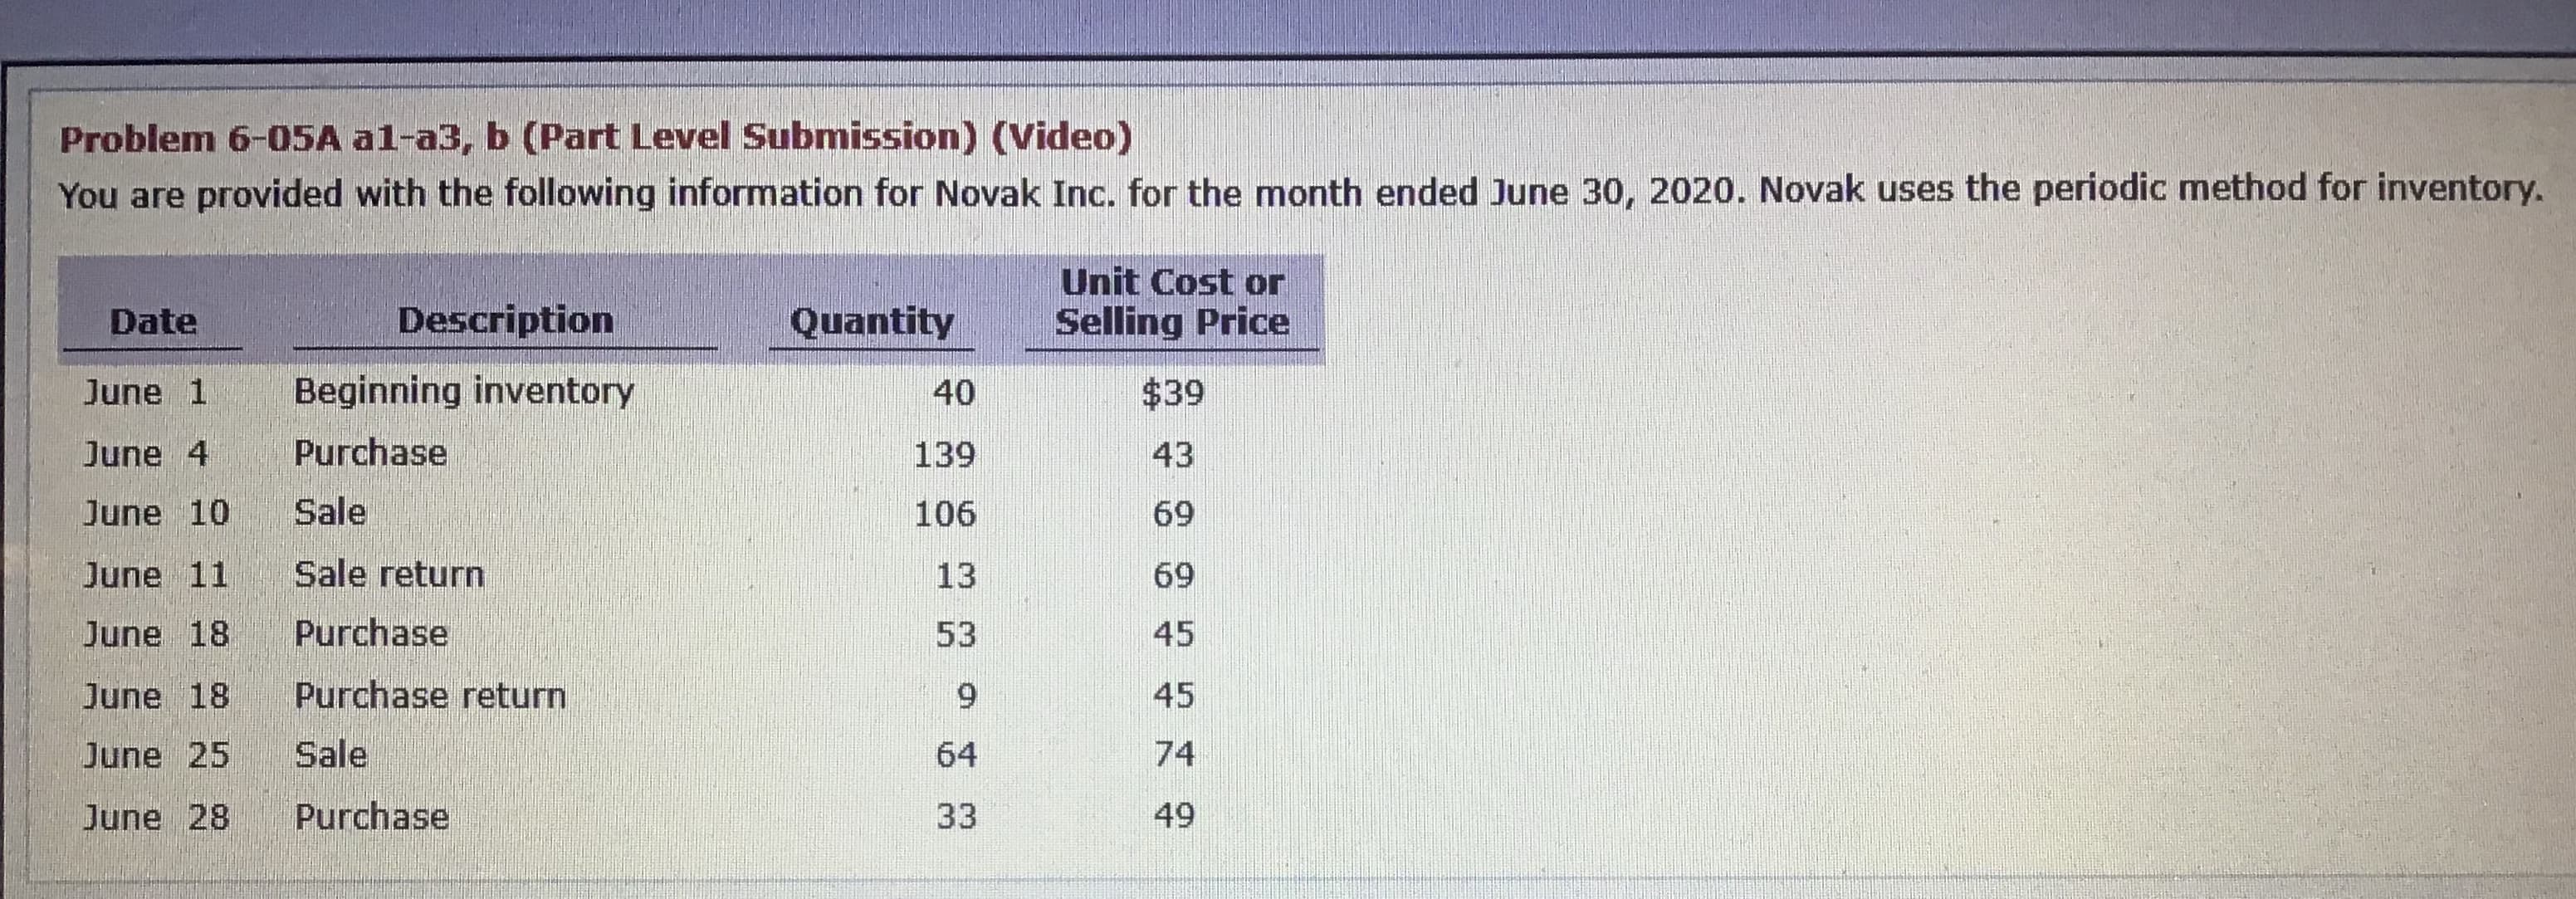 You are provided with the following information for Novak Inc. for the month ended June 30, 2020. Novak uses the periodic method for inventory.
Unit Cost or
Date
Description
Quantity
Selling Price
June 1
Beginning inventory
40
$39
June 4
Purchase
139
43
June 10
Sale
106
69
June 11
Sale return
13
69
June 18
Purchase
53
45
